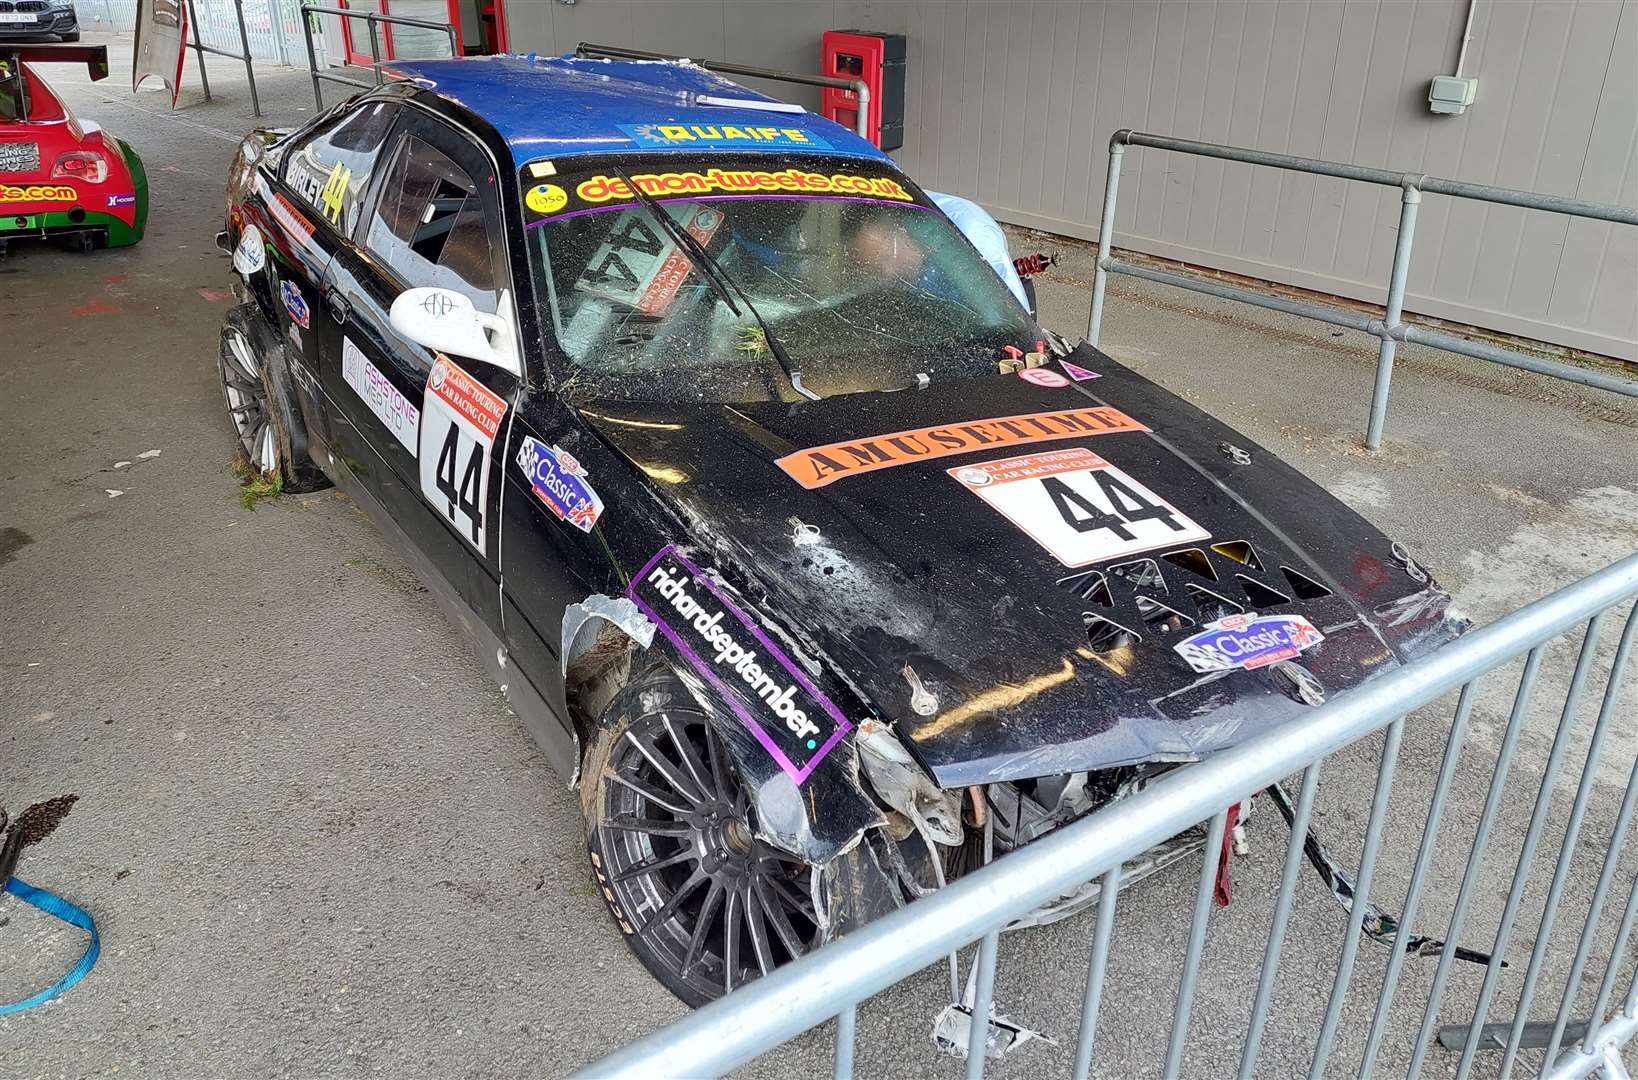 Birley’s BMW in the scrutineering bay at Brands Hatch after the crash in race two